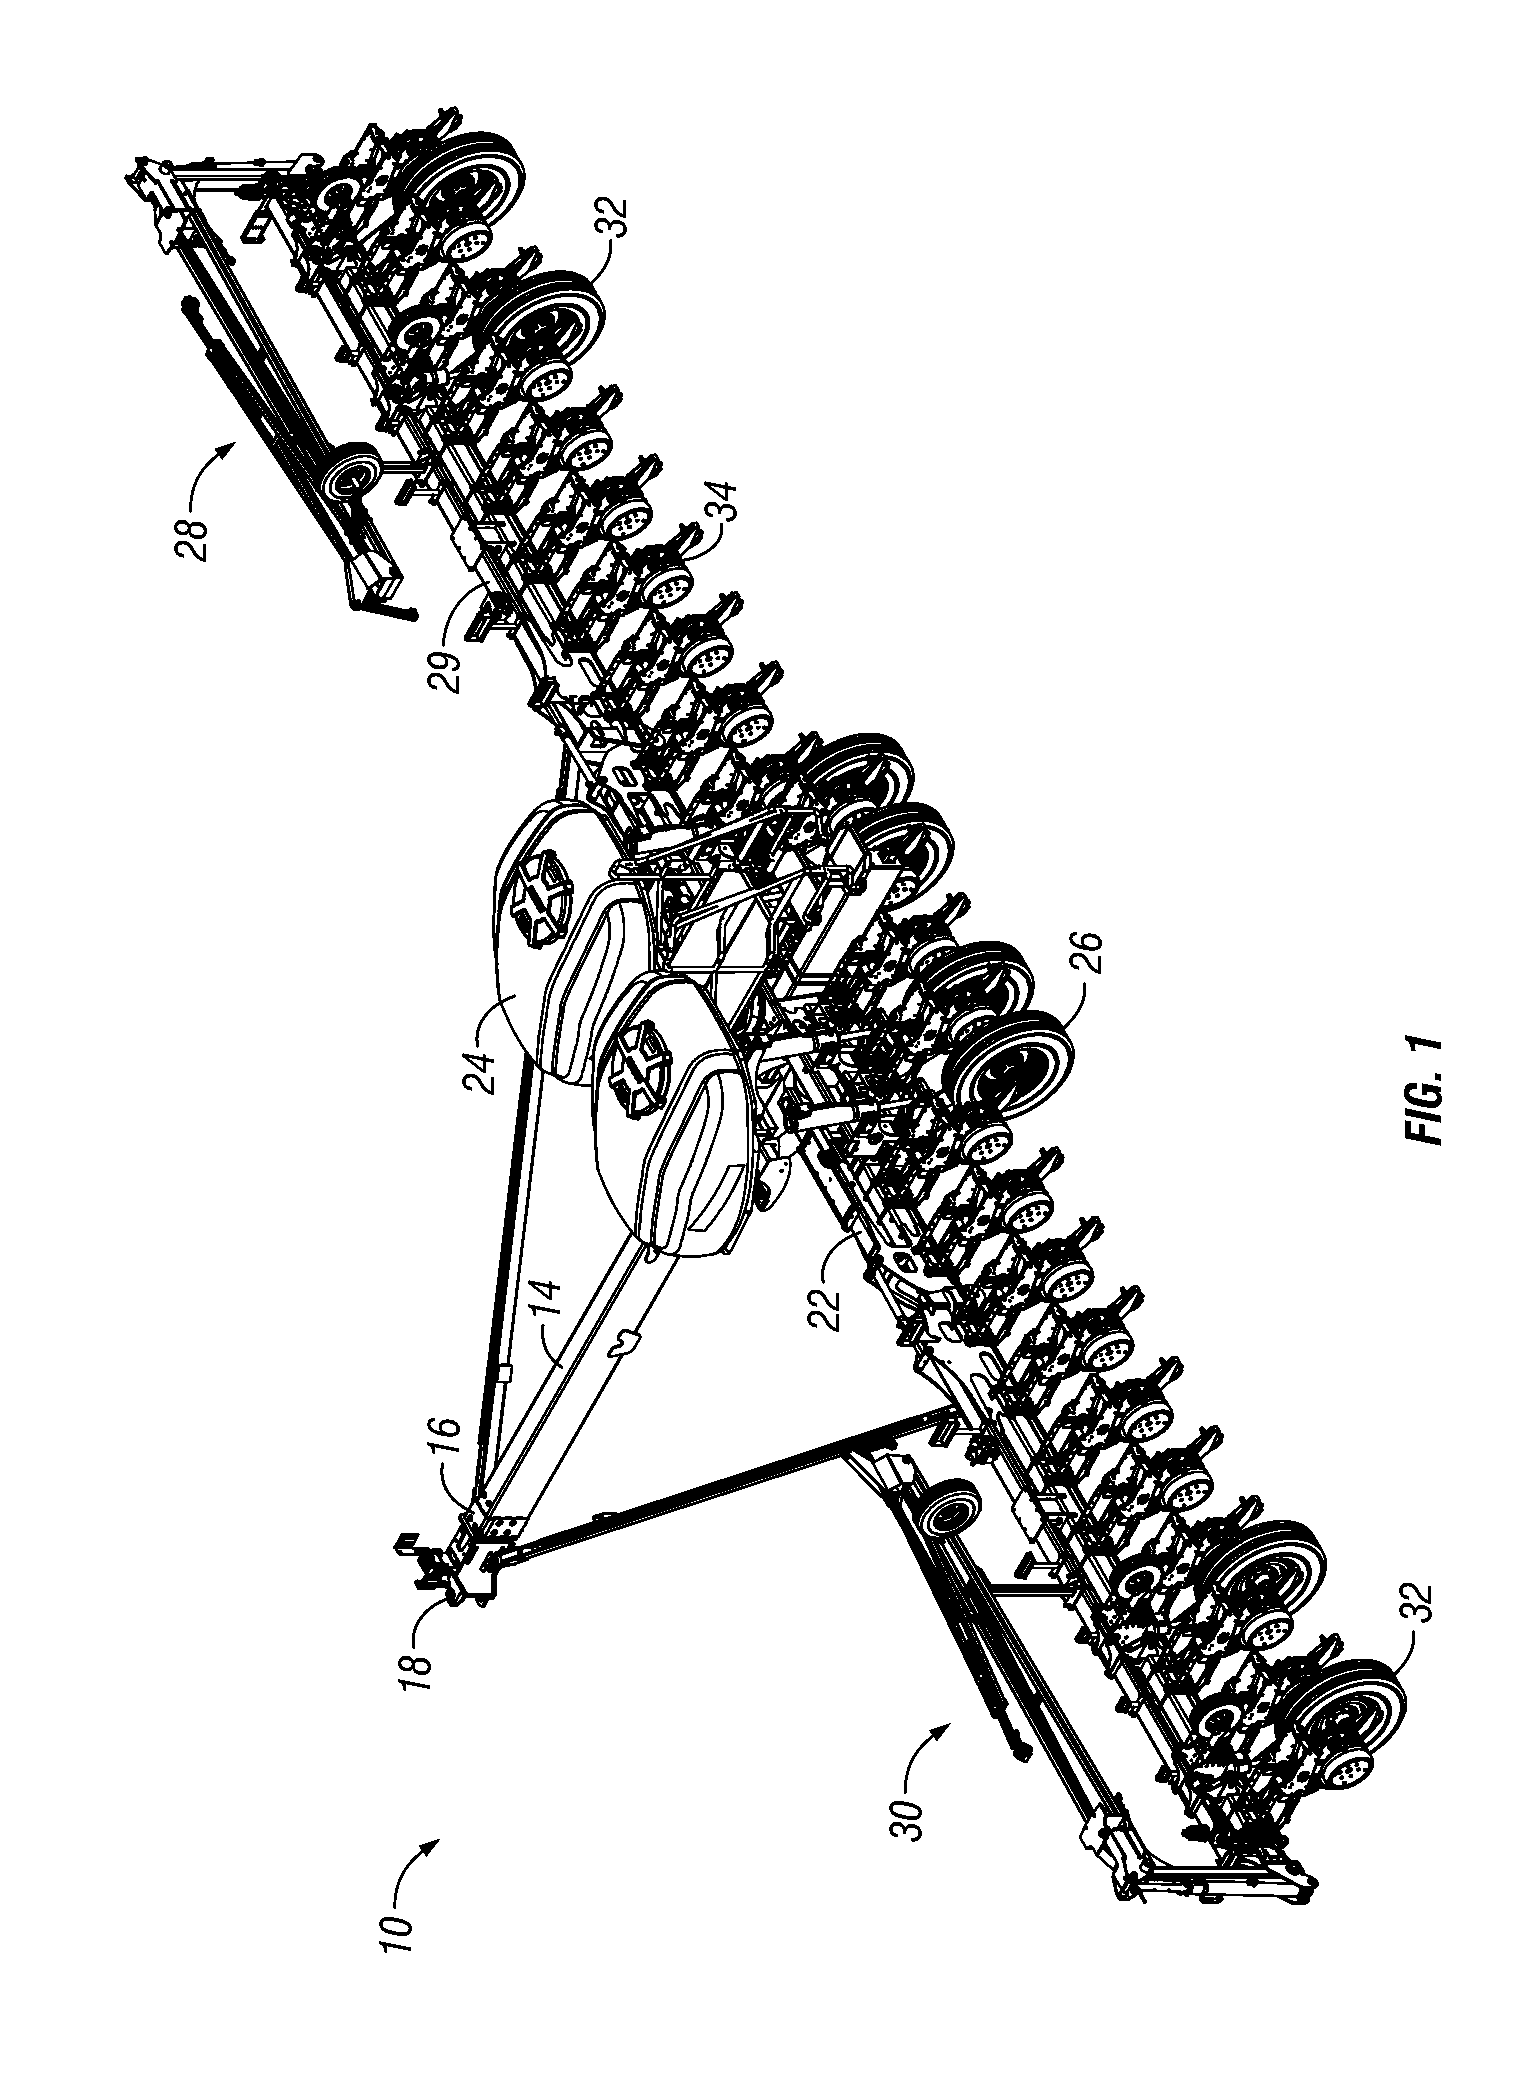 Planter with seed delivery apparatus